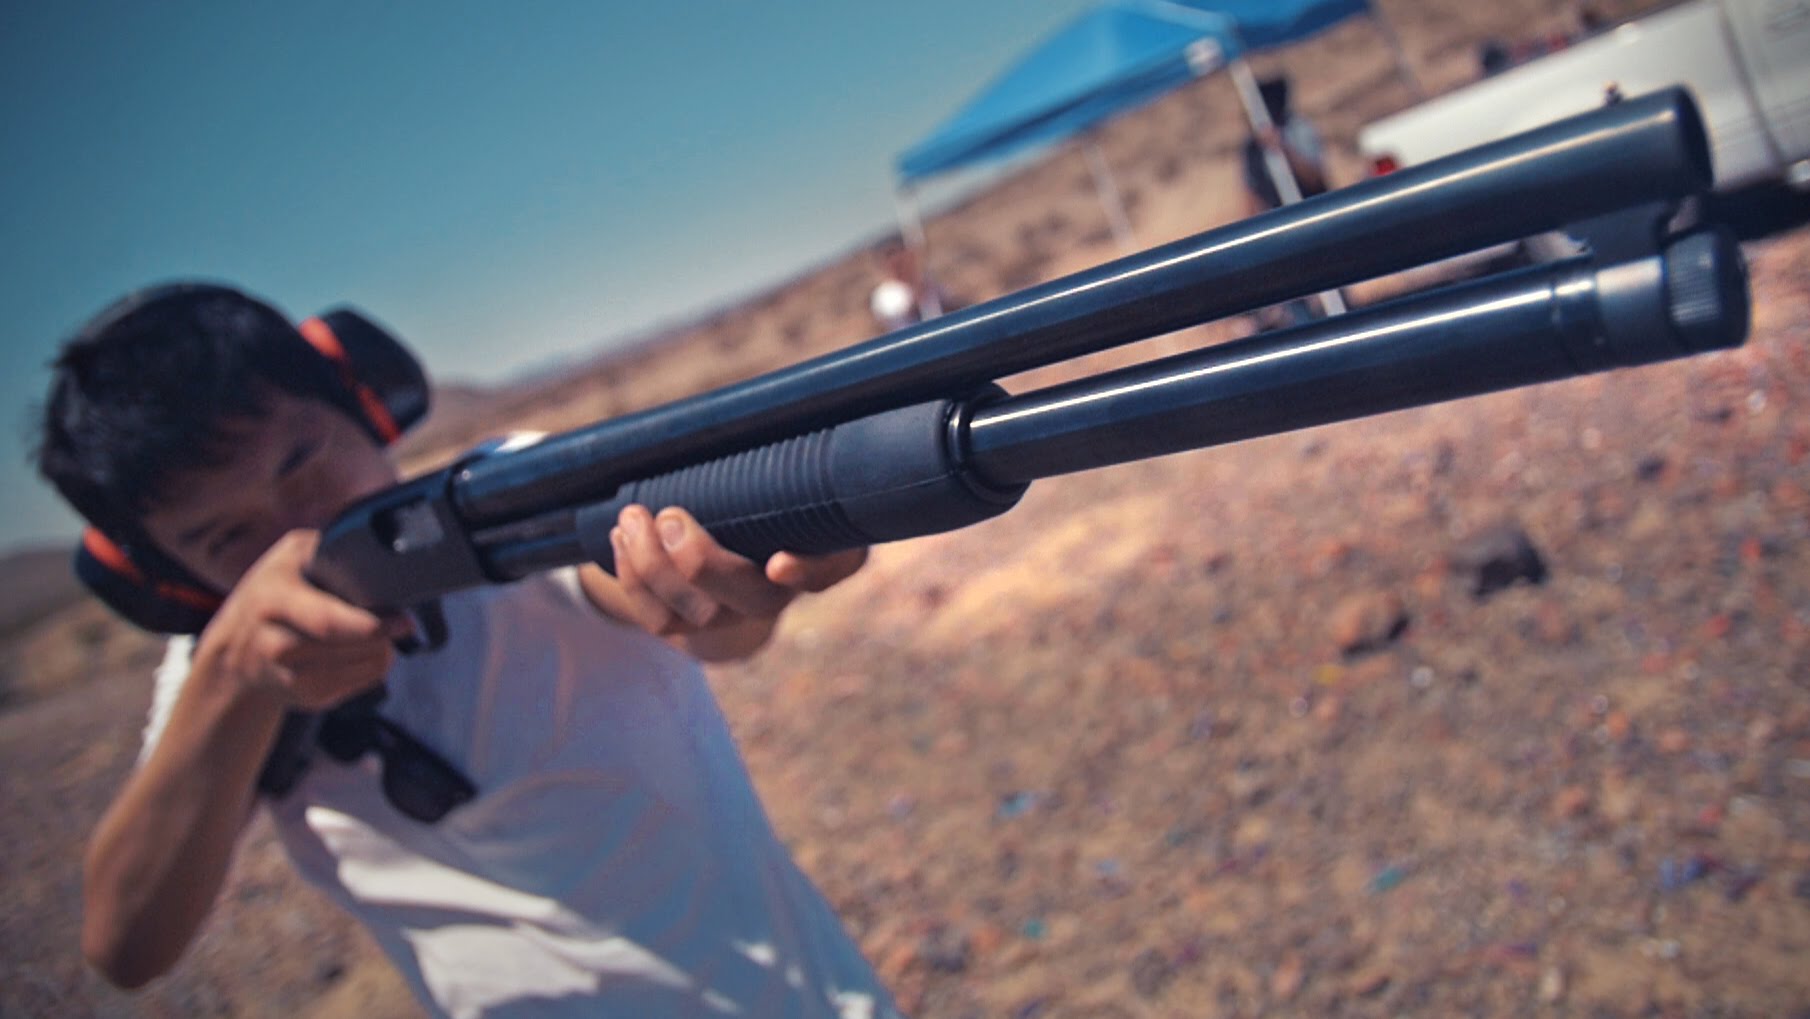 Mossberg 500 Review